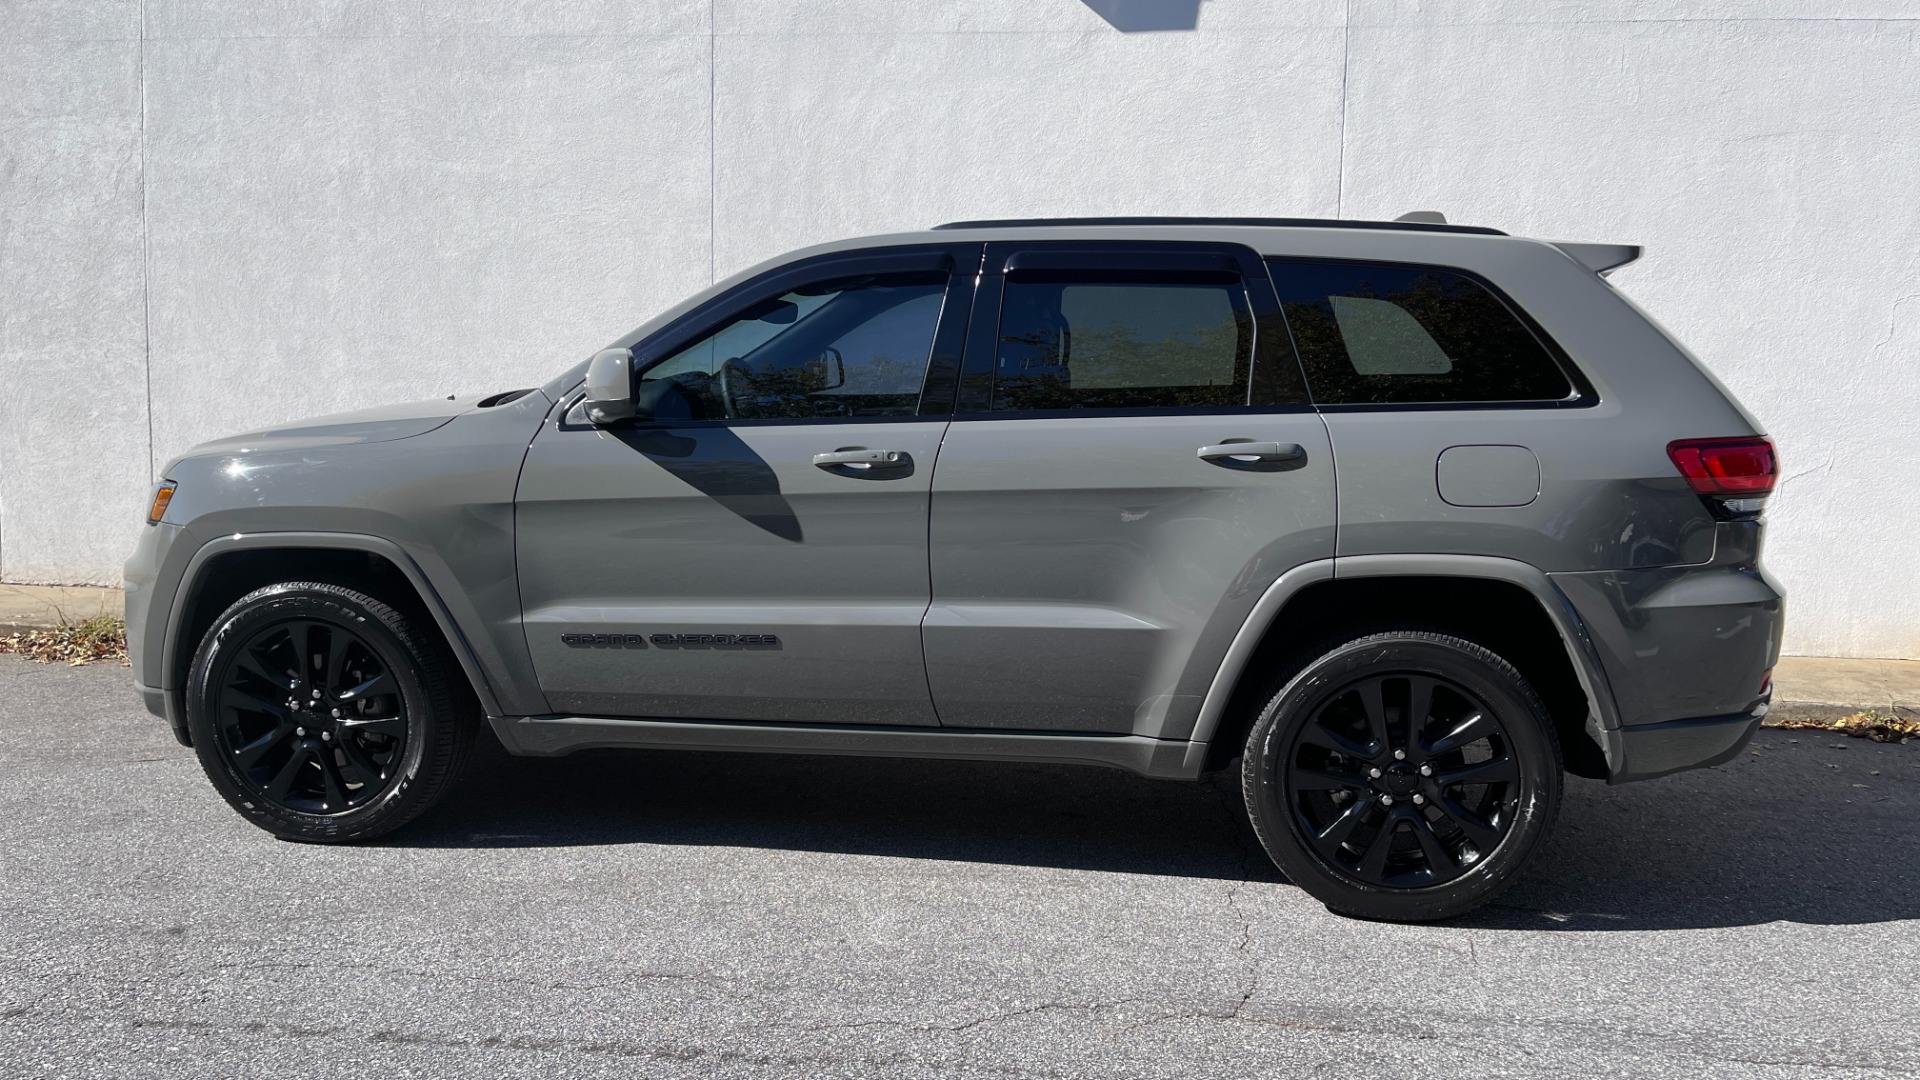 Used 2019 Jeep Grand Cherokee ALTITUDE / BLACK 20IN WHEELS / BLACK TRIM / SUNROOF / HEATED SEATS for sale Sold at Formula Imports in Charlotte NC 28227 7